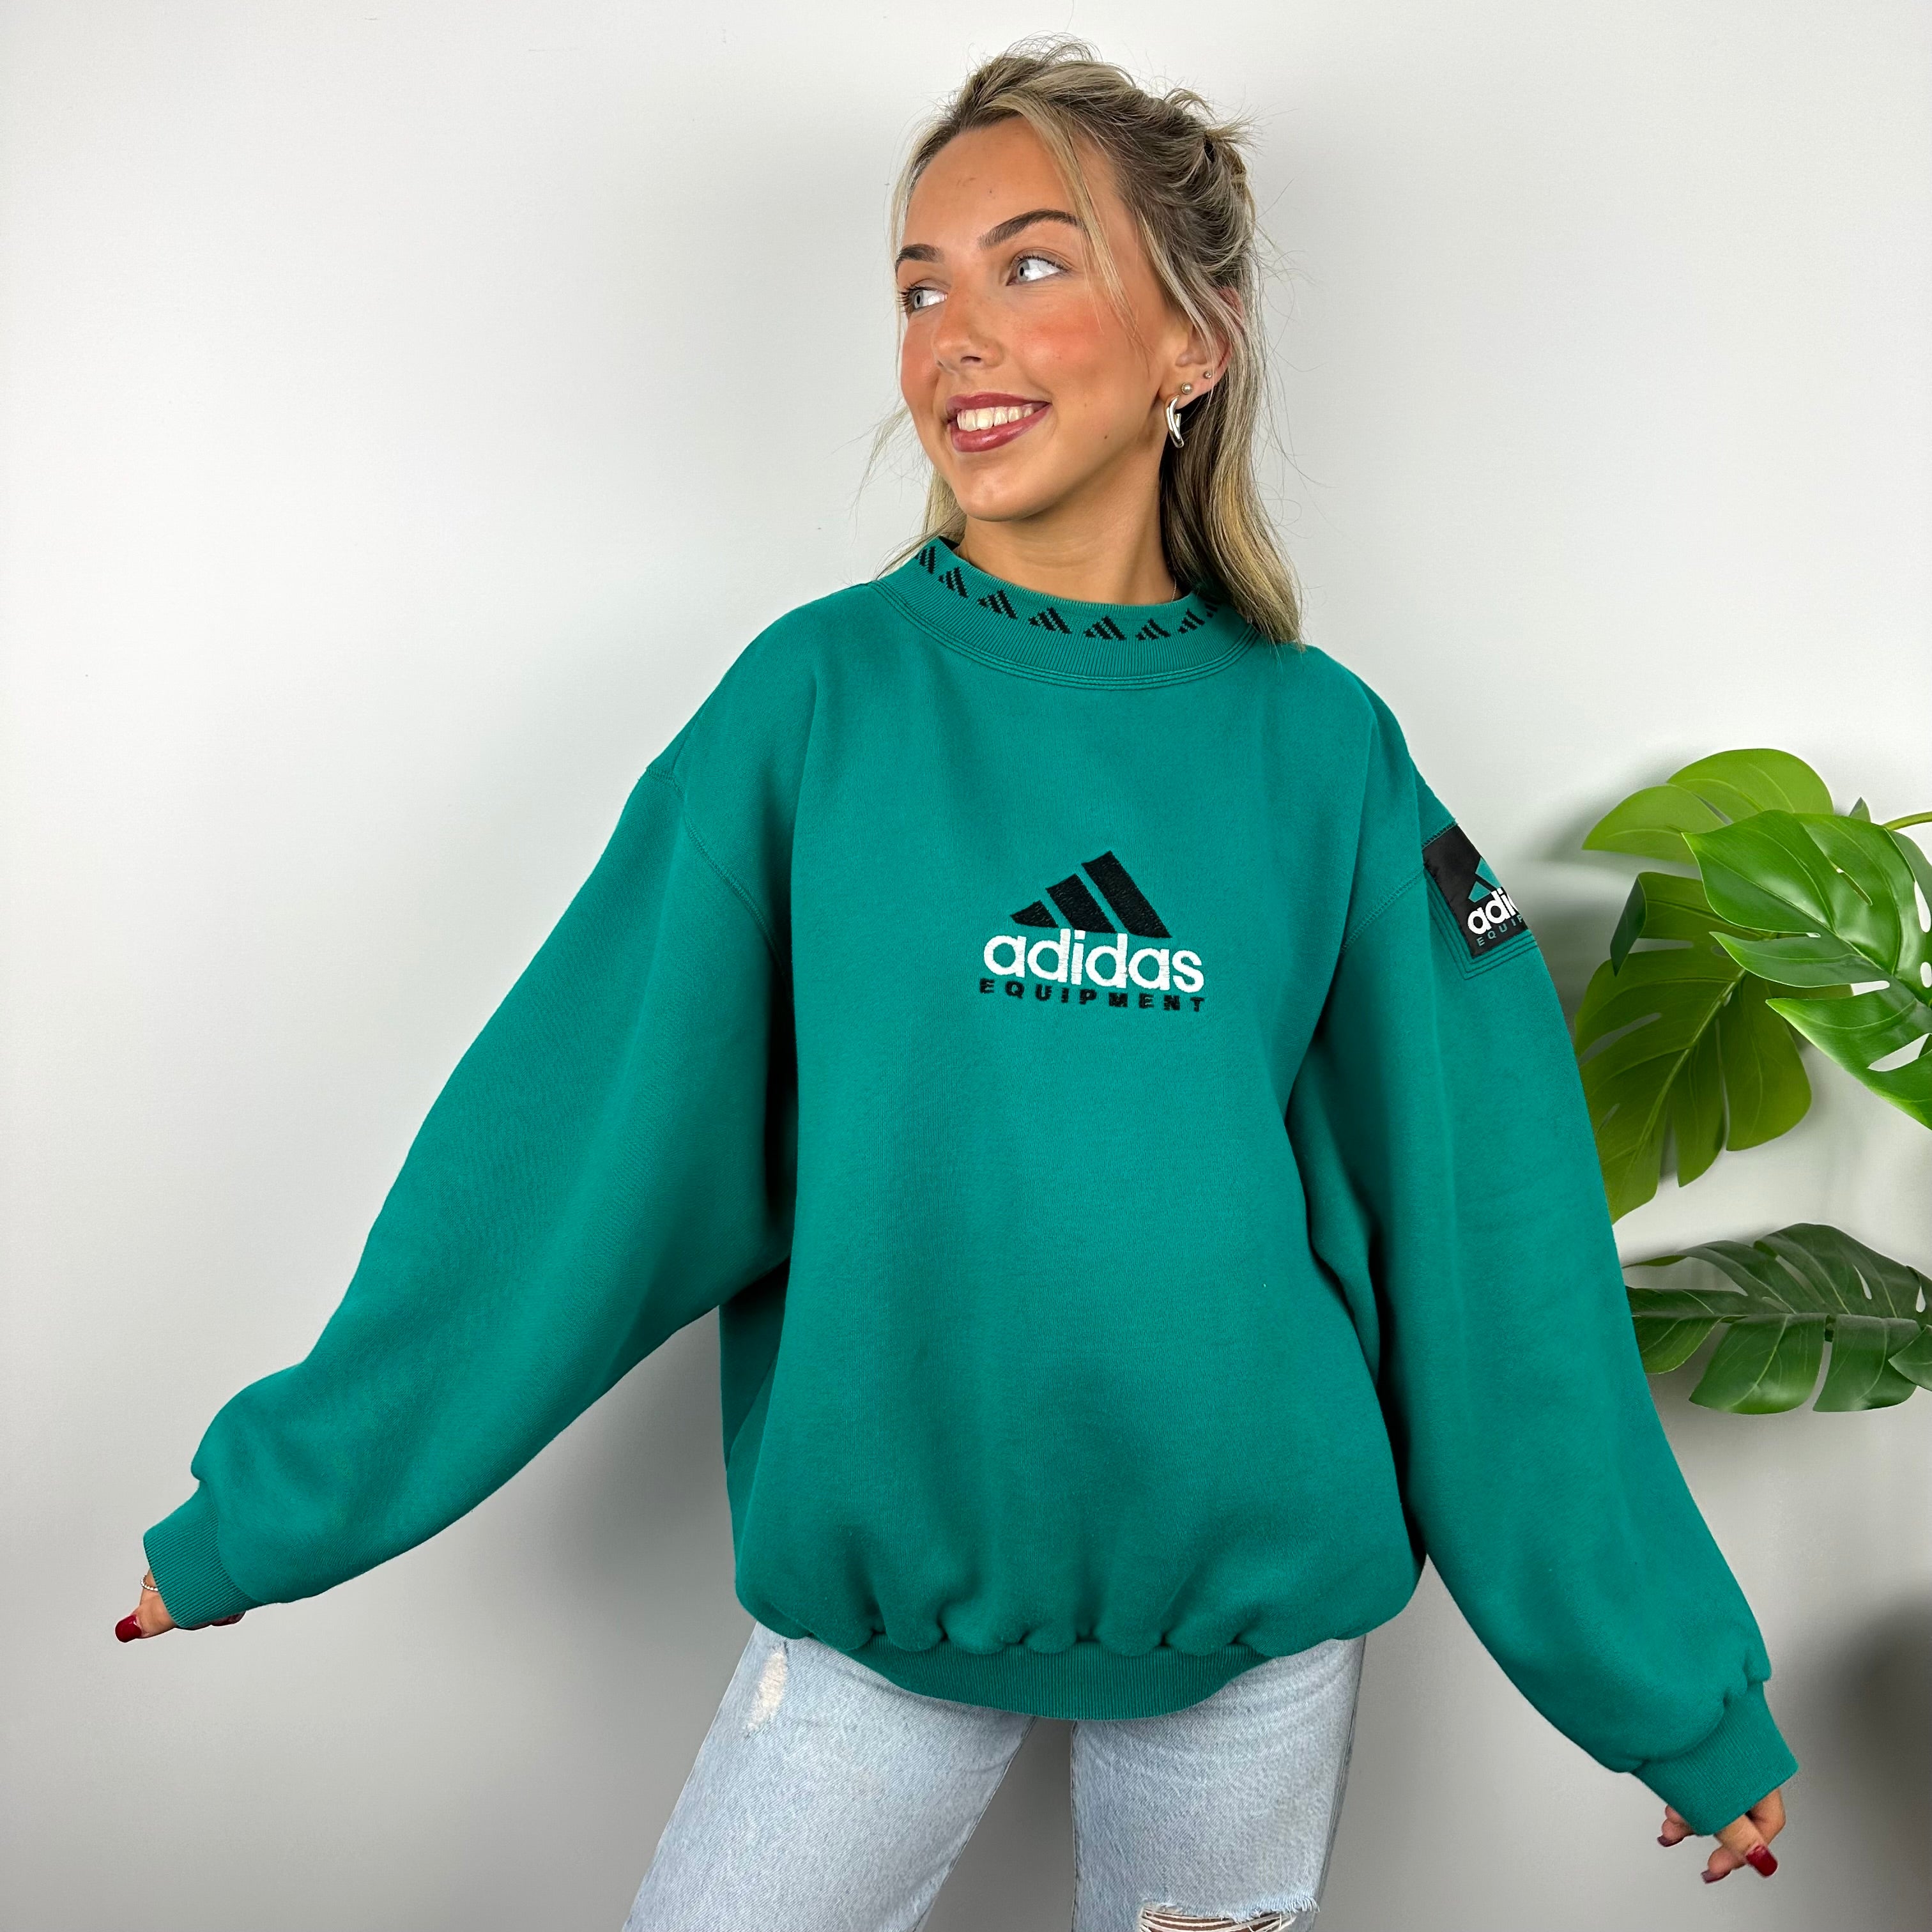 Adidas Equipment RARE Turquoise Blue Embroidered Spell Out Sweatshirt (M)